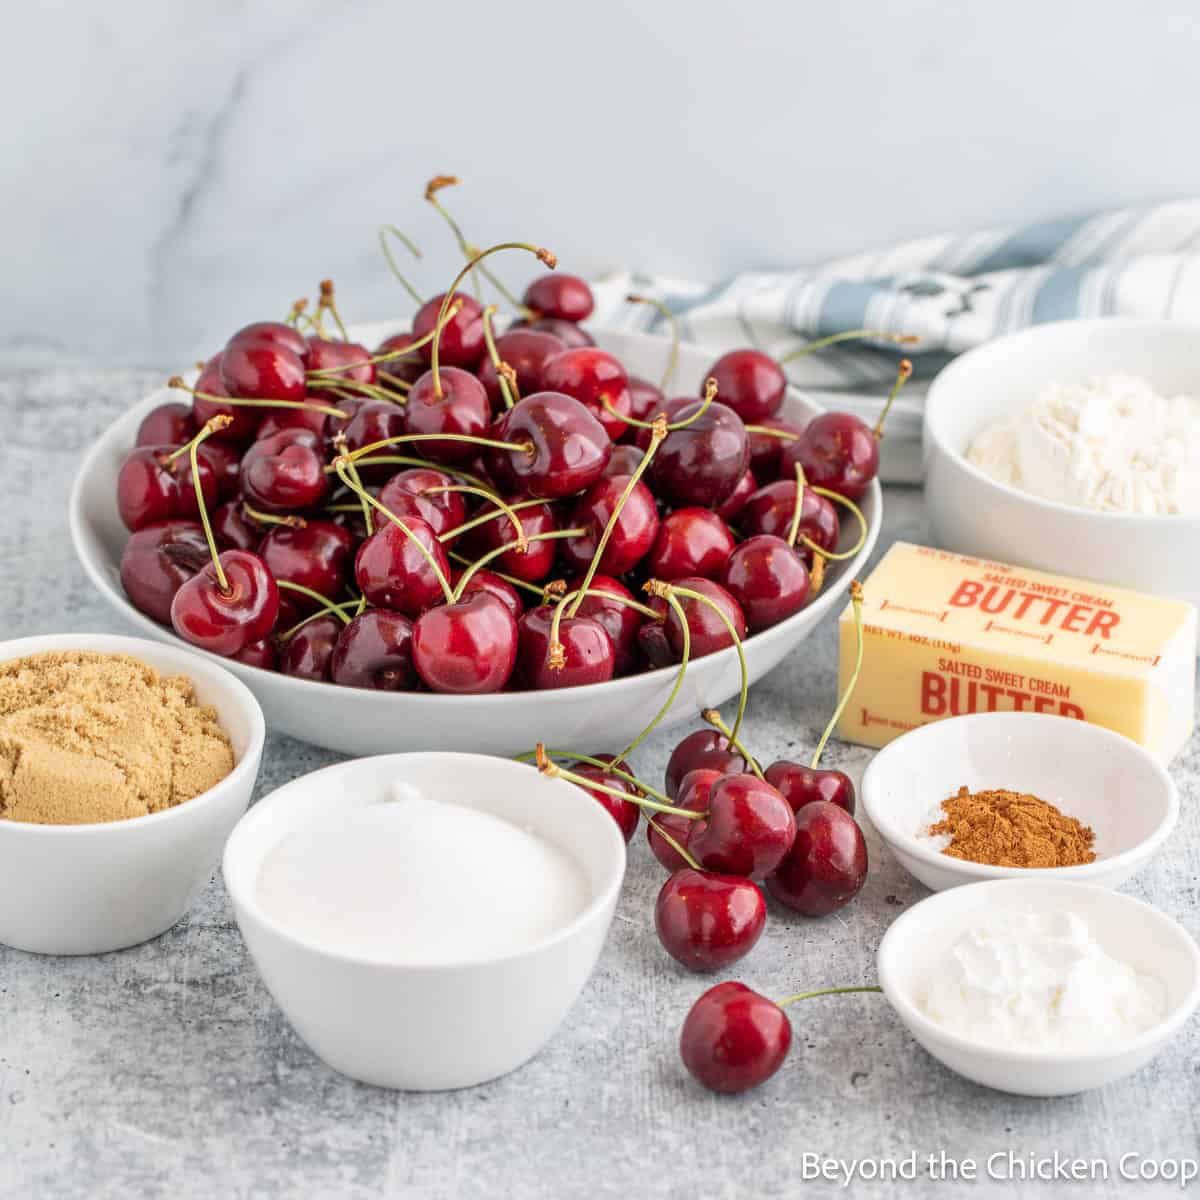 Ingredients for making a cherry crumble. 